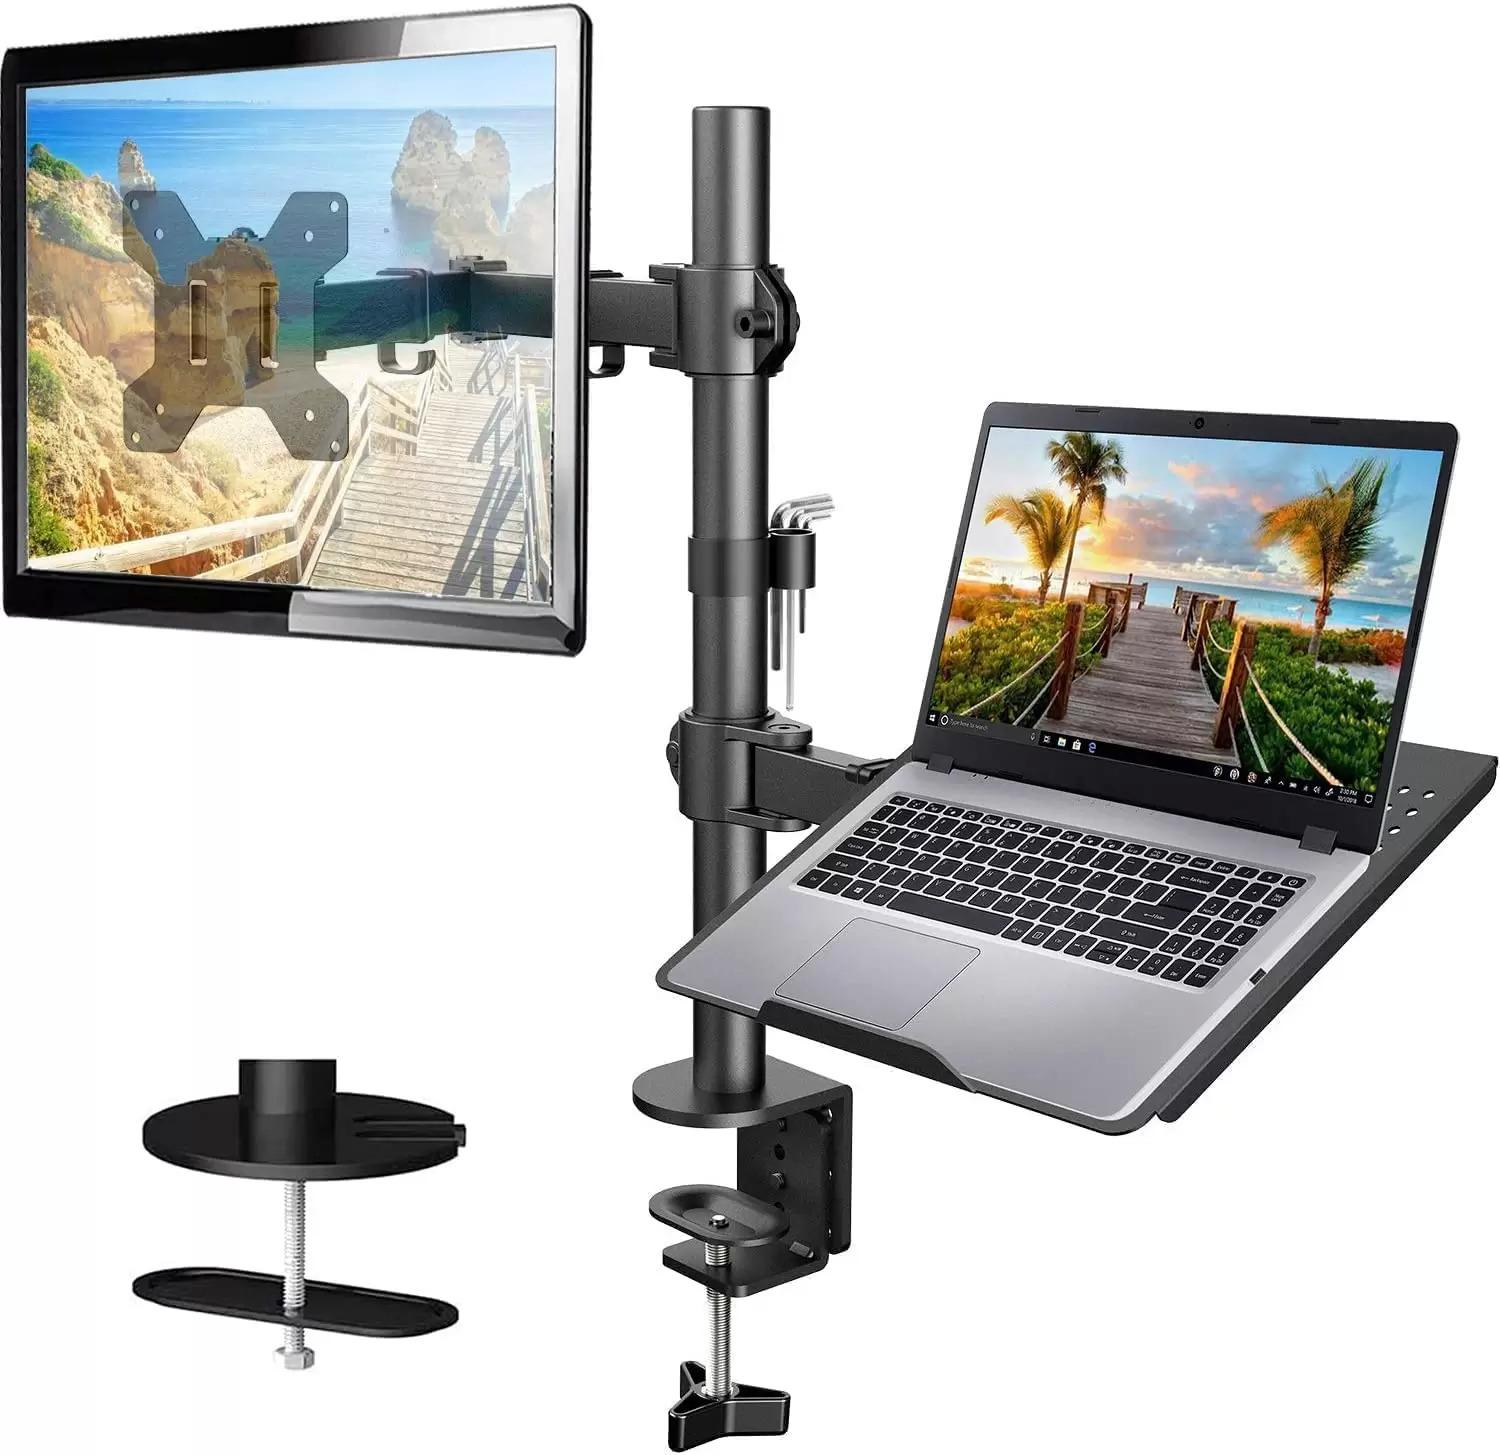 Huanuo Adjustable Single Monitor Desk Mount with Laptop Tray for $23.99 Shipped